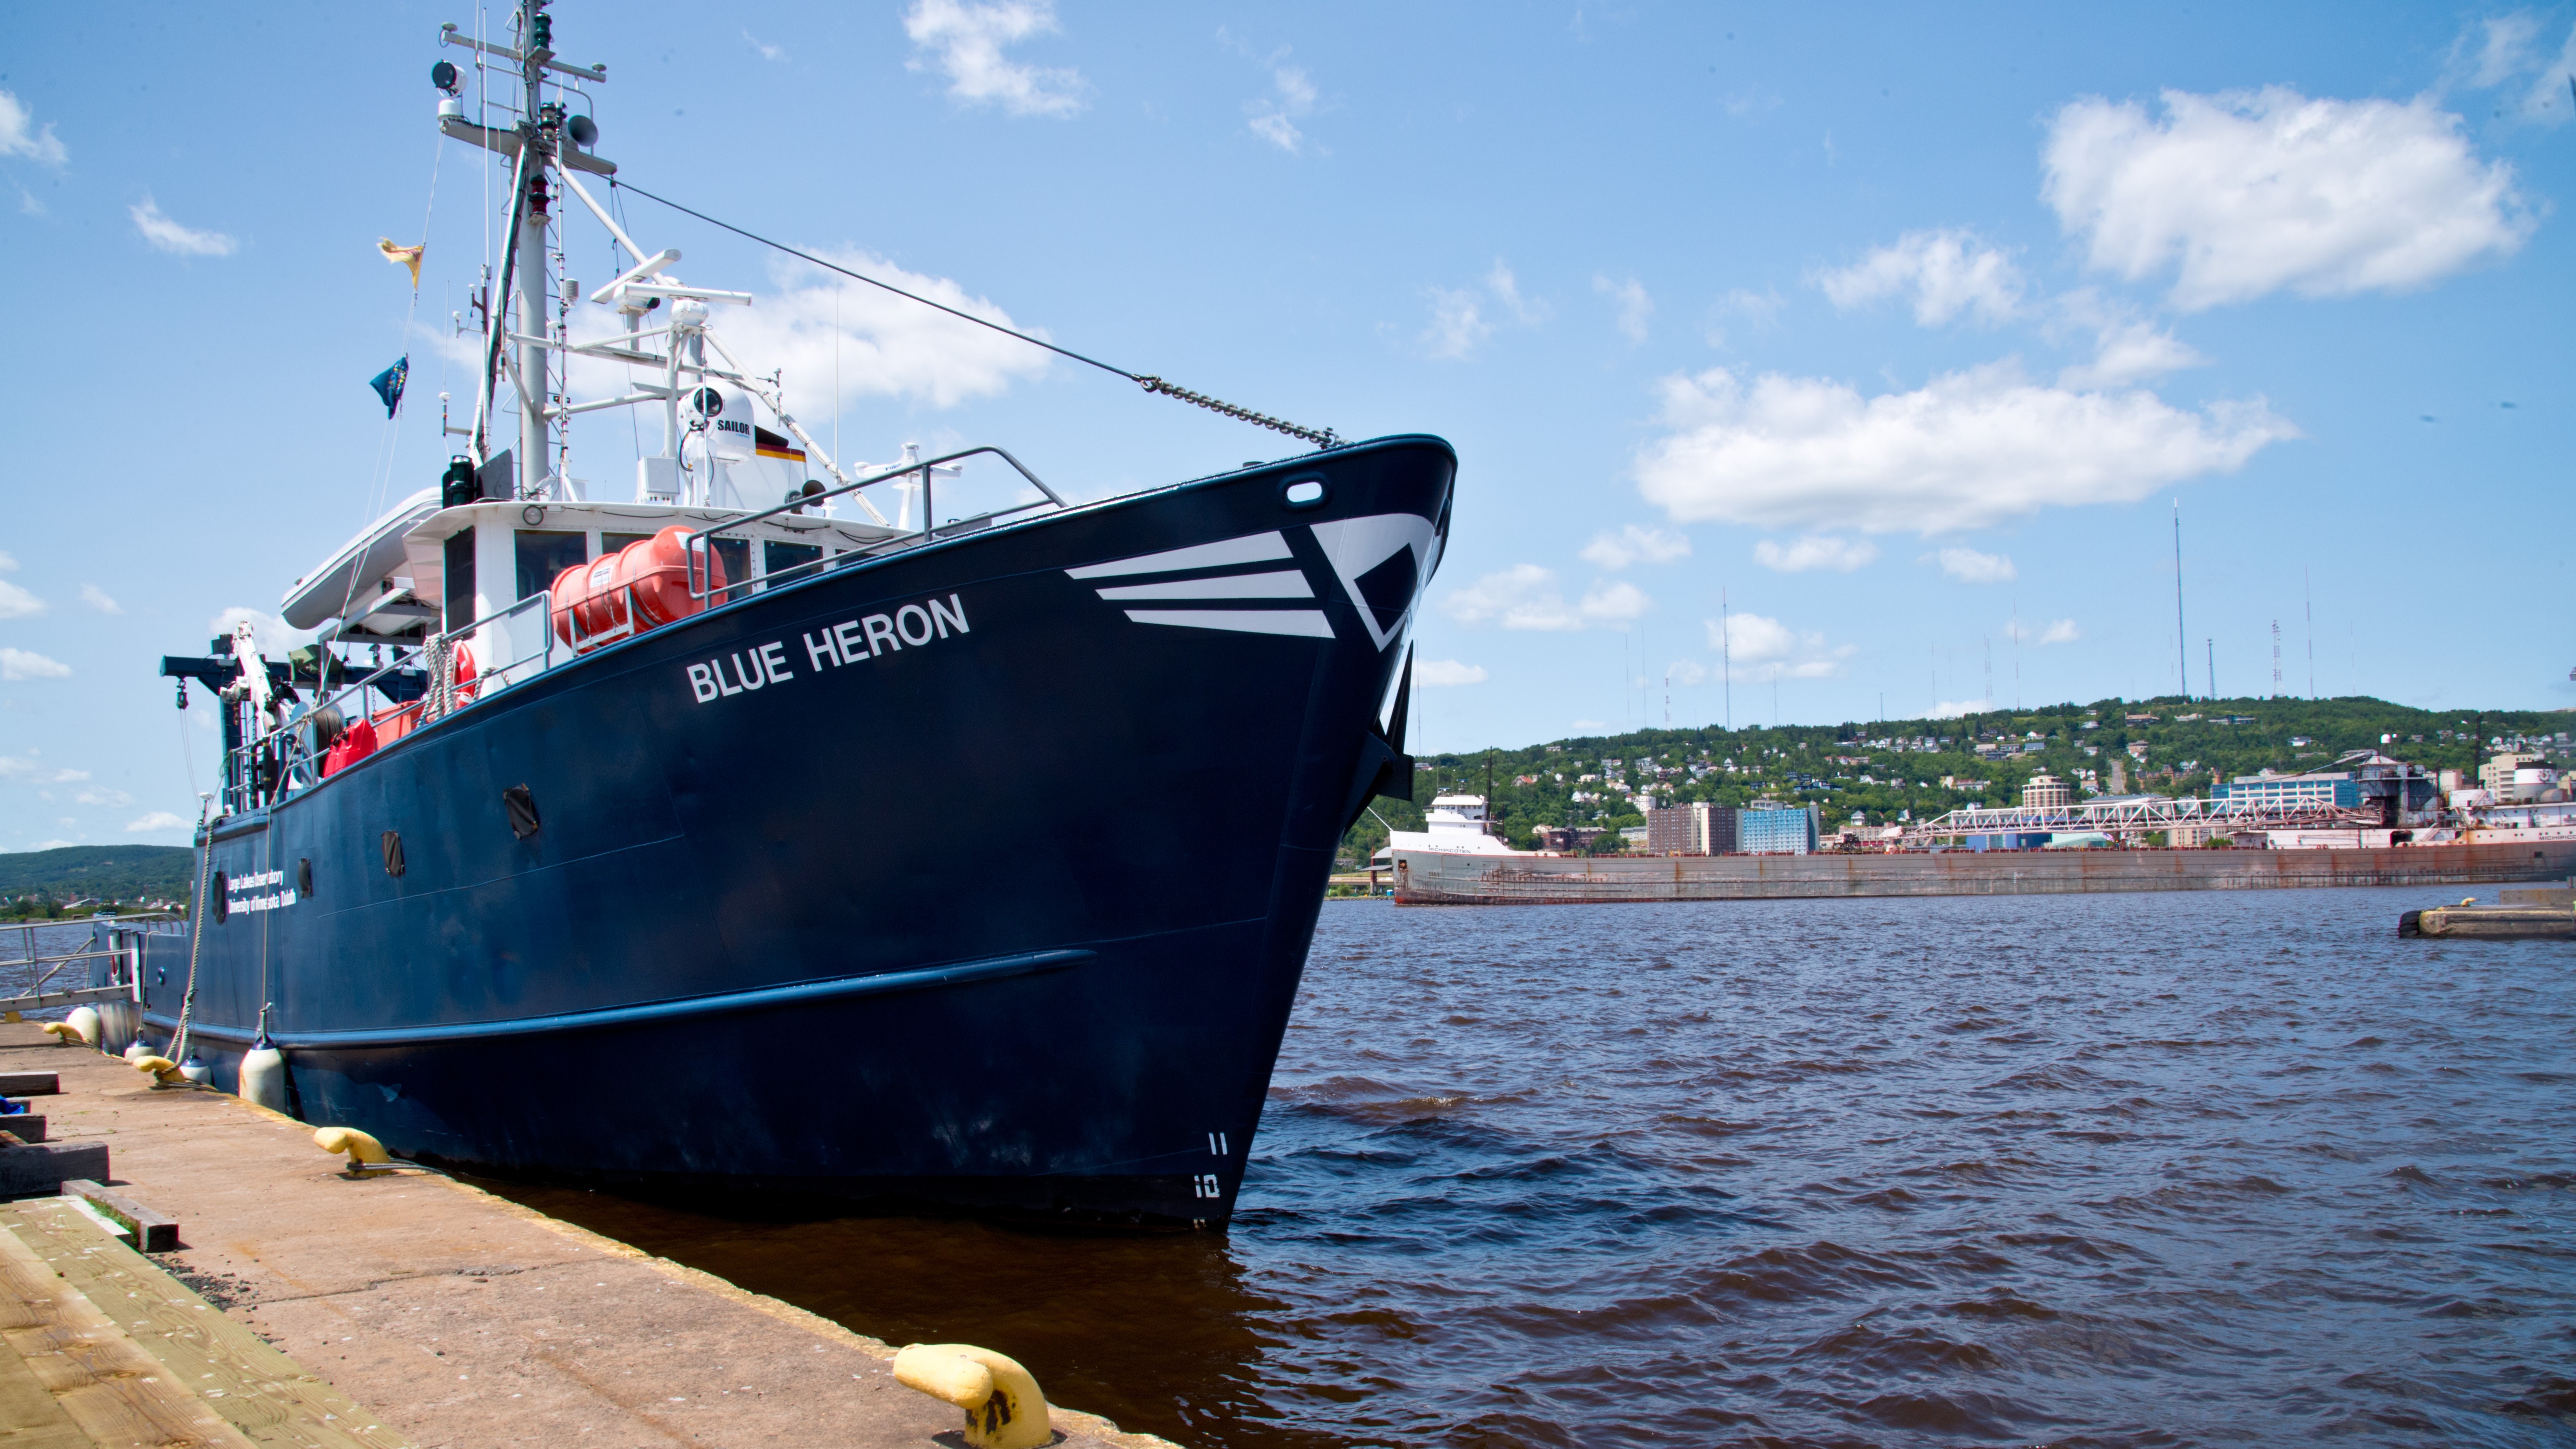 The Blue Heron research boat docked near shore